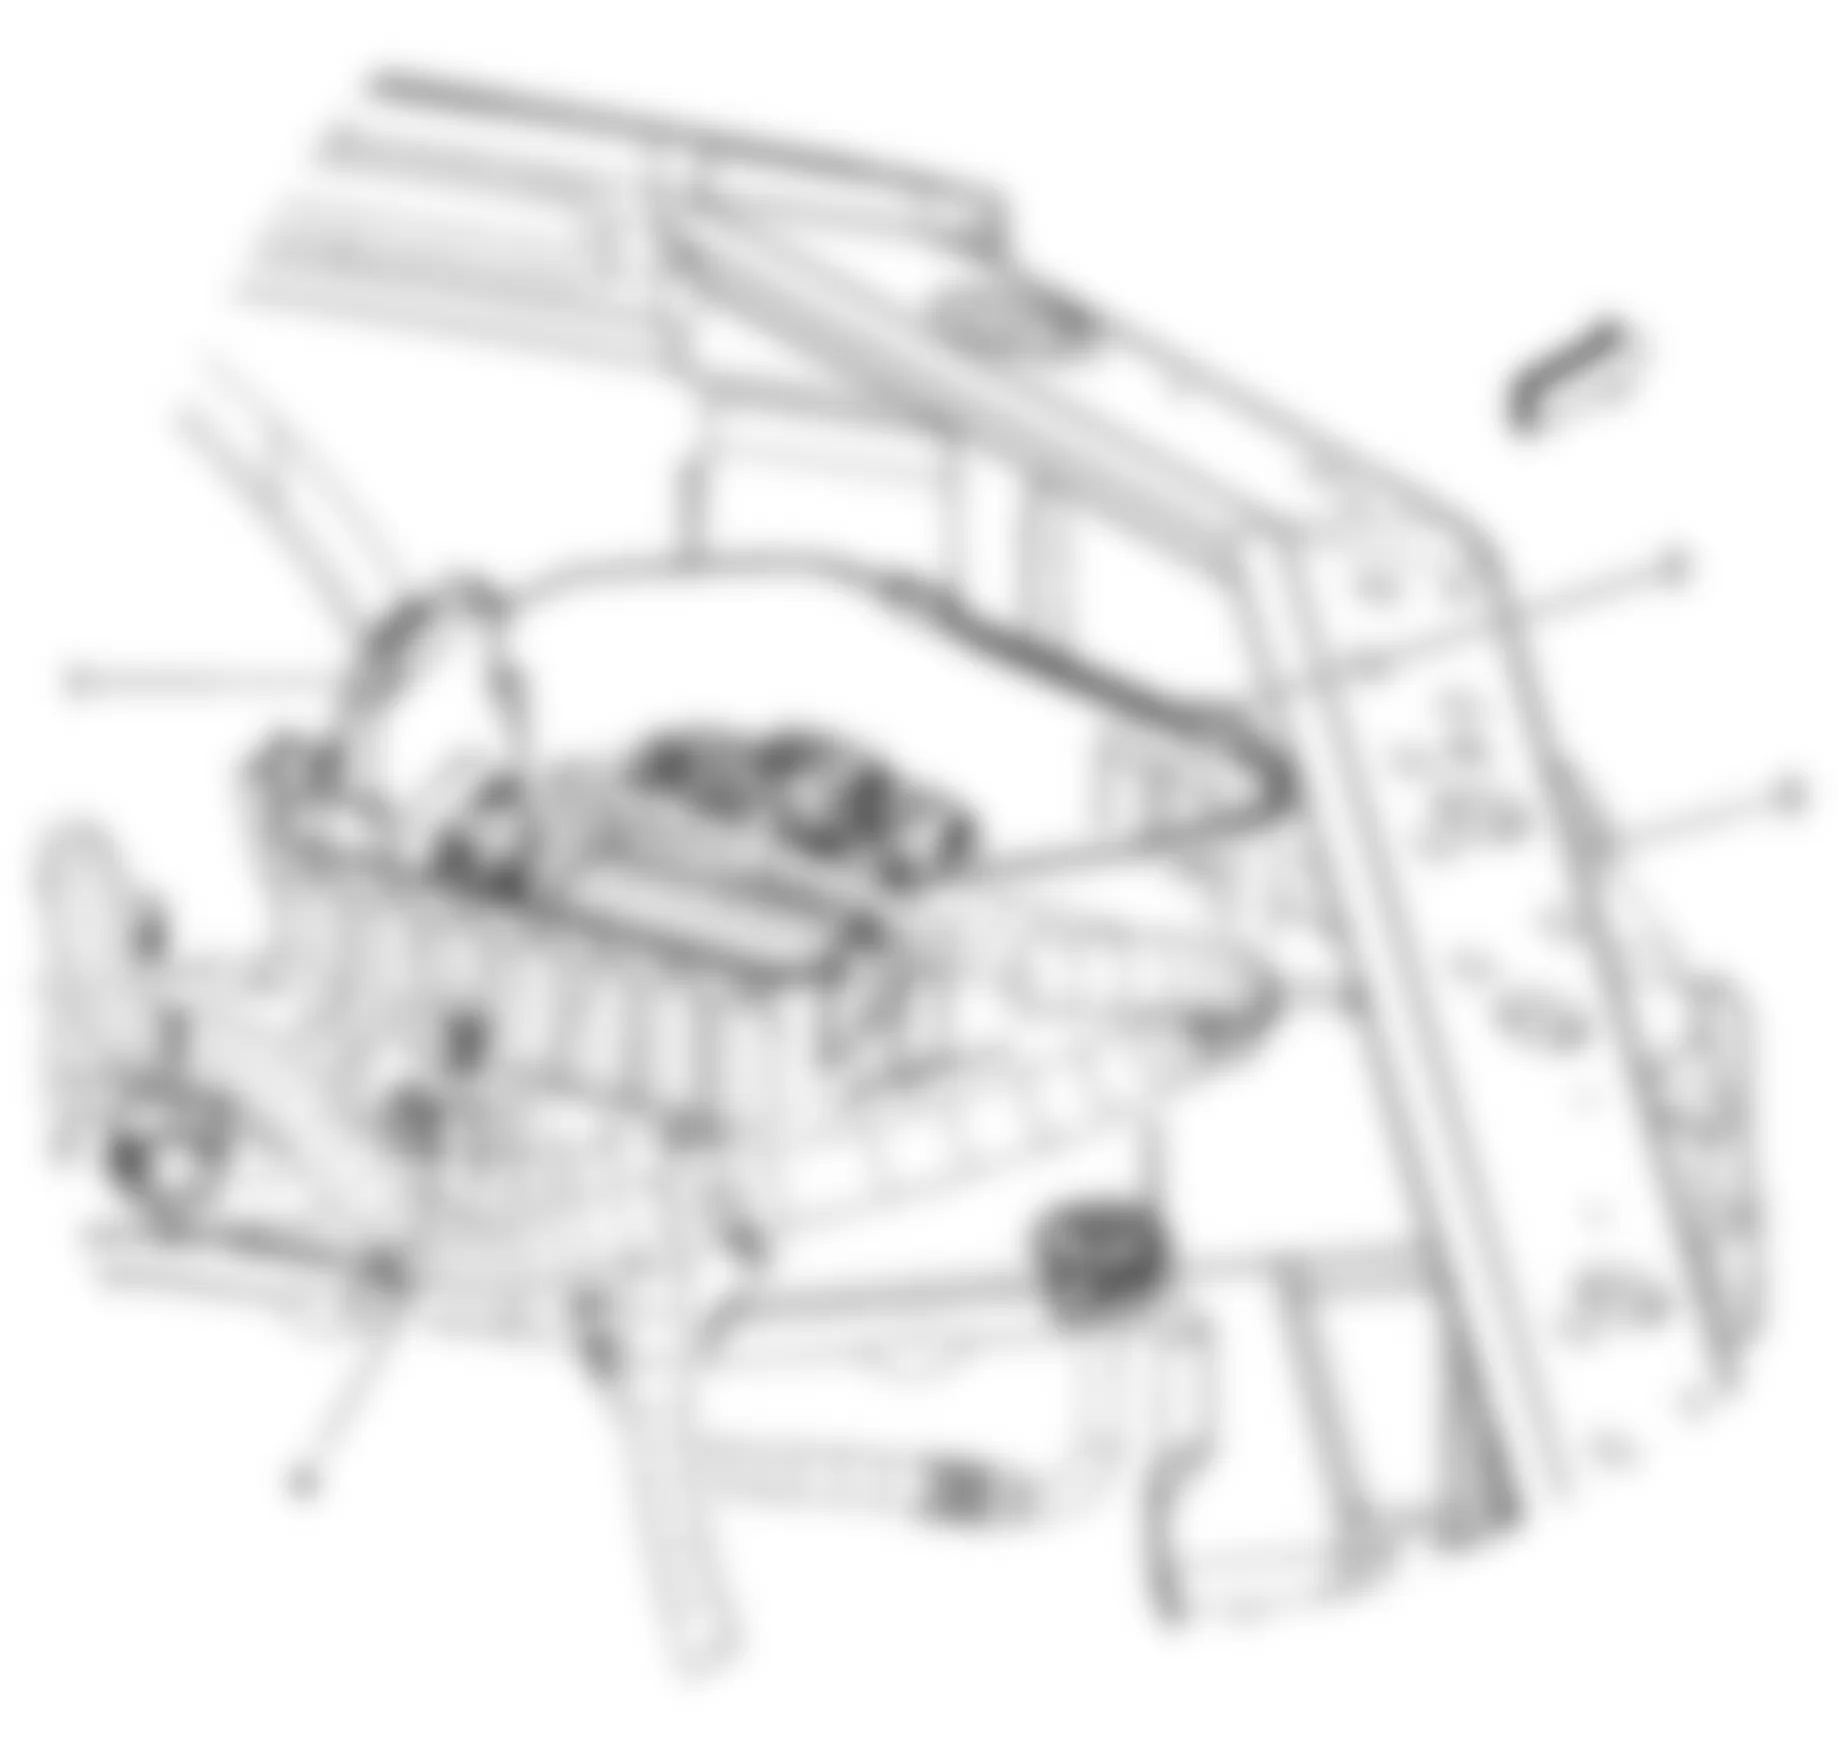 Buick Allure CXL 2008 - Component Locations -  Left Front Of Engine Compartment (5.3L)